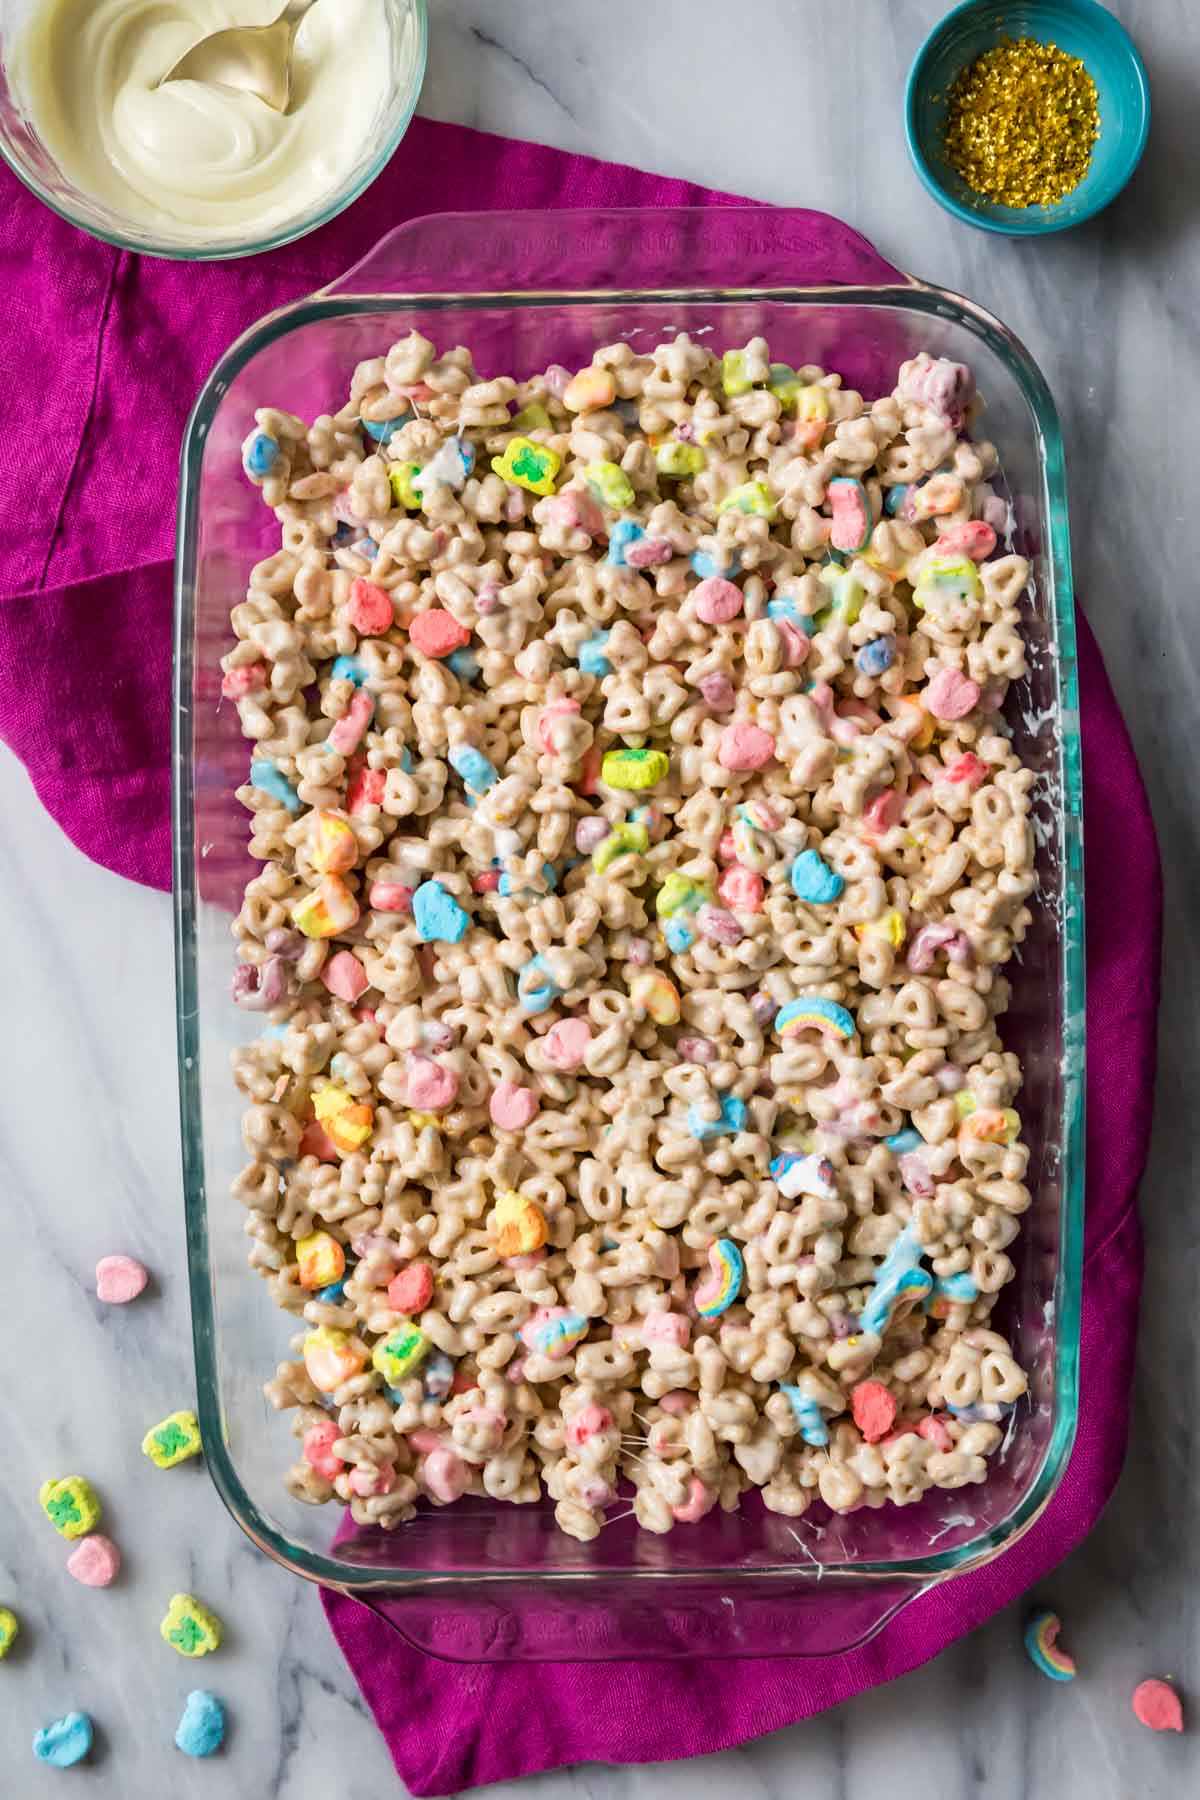 Overhead view of a mixture of lucky charms cereal and melted marshmallow in a glass casserole dish.